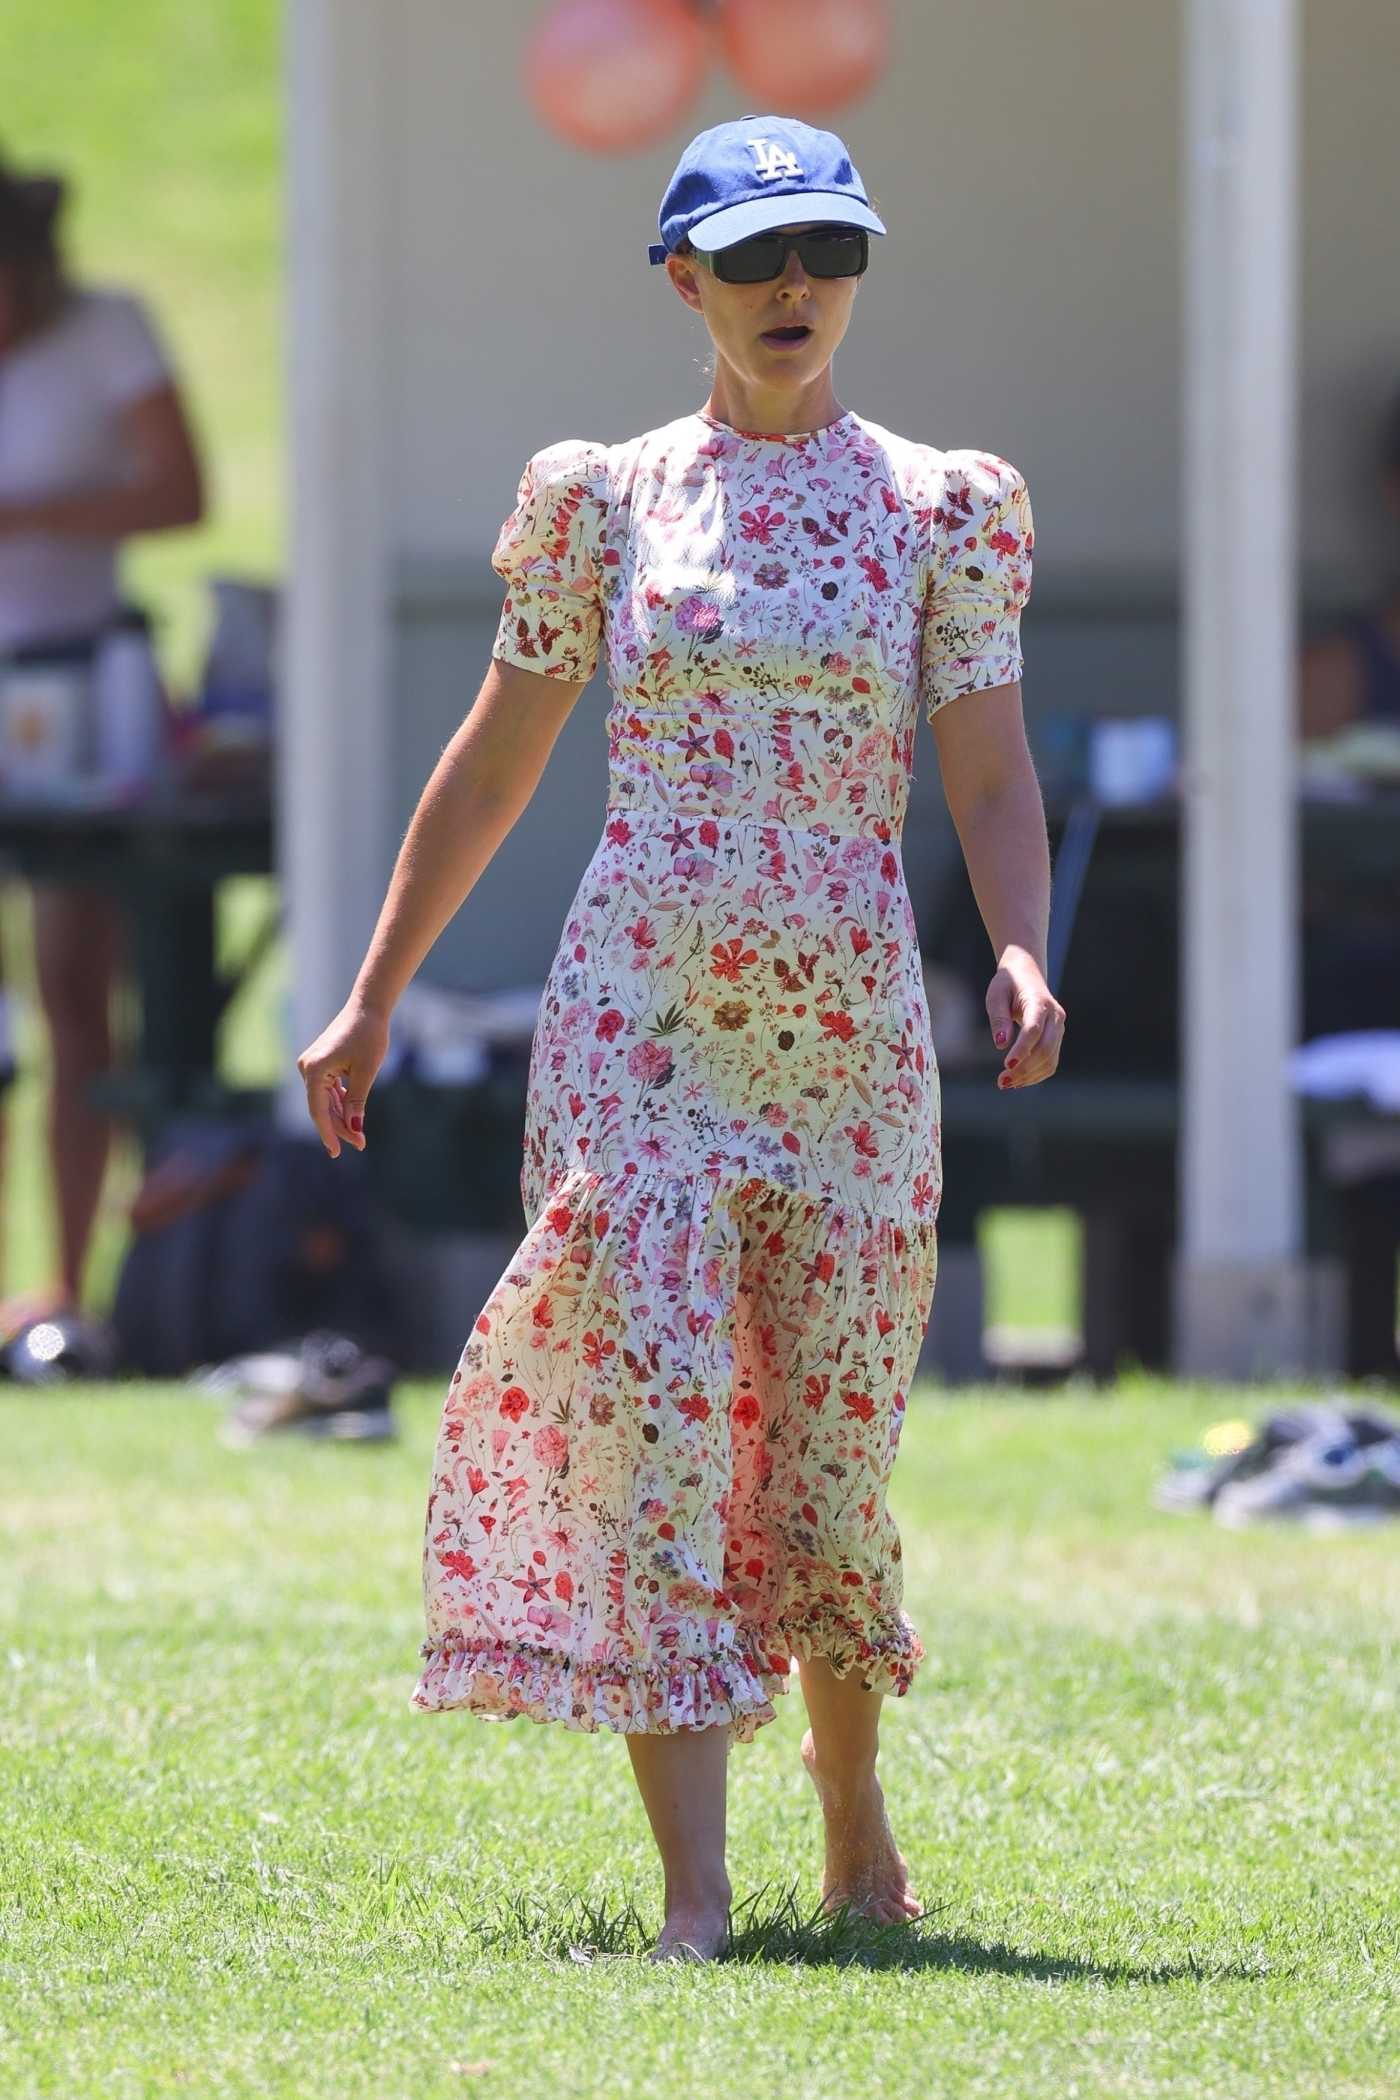 Natalie Portman in a Floral Dress Was Seen Out in Sydney 02/20/2022